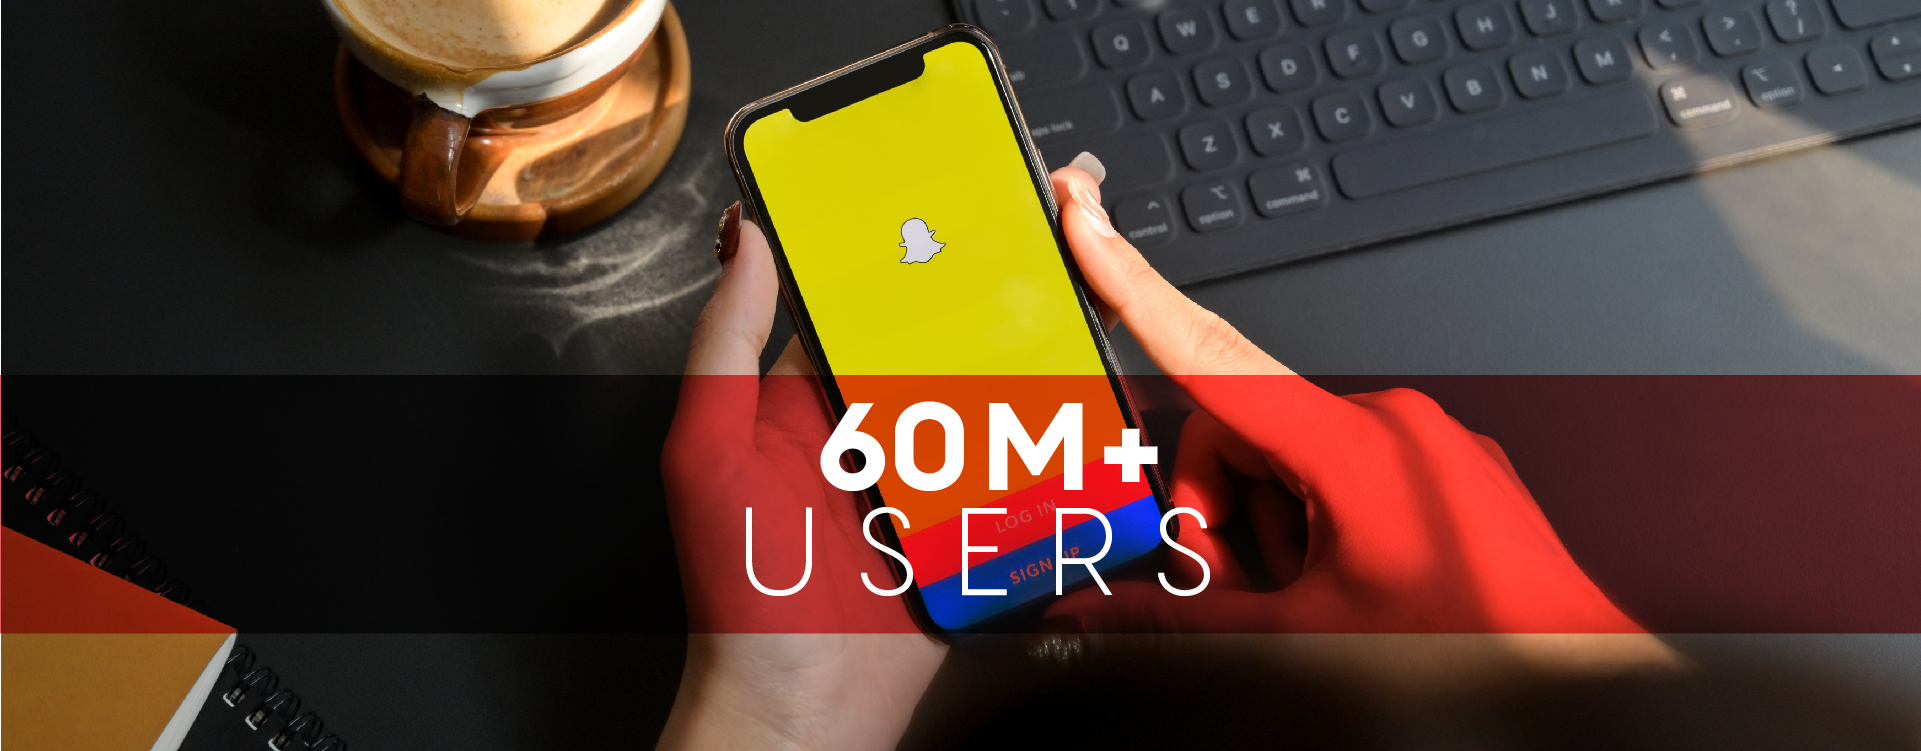 Crossing the 60 million user mark: The story behind Snapchat’s growth momentum